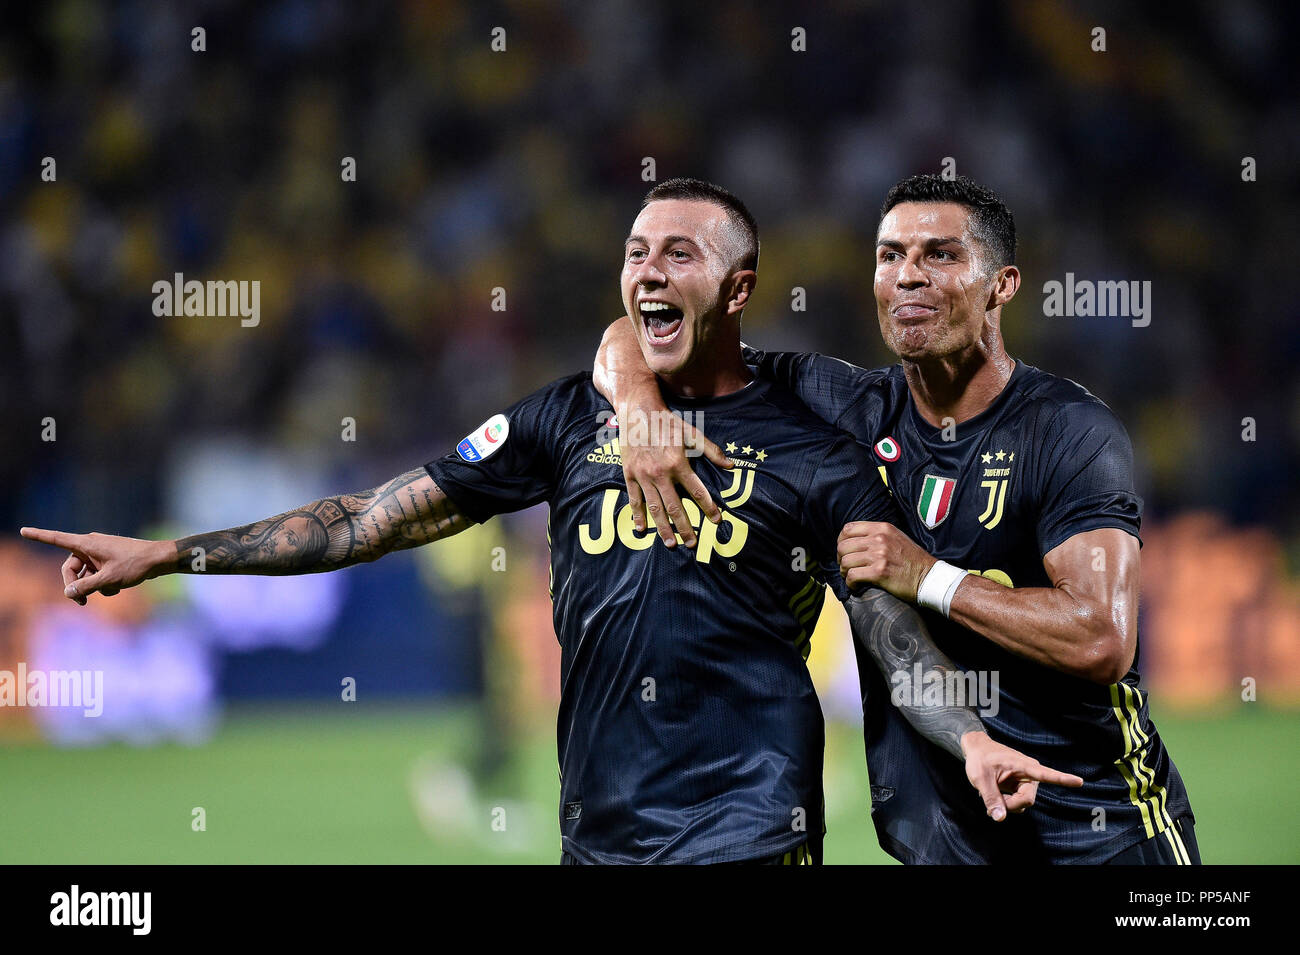 Turin, Italy - 26 June, 2020: Paulo Dybala (C) of Juventus FC celebrates  with Cristiano Ronaldo (R) and Federico Bernardeschi (L) of Juventus FC  after scoring a goal during the Serie A